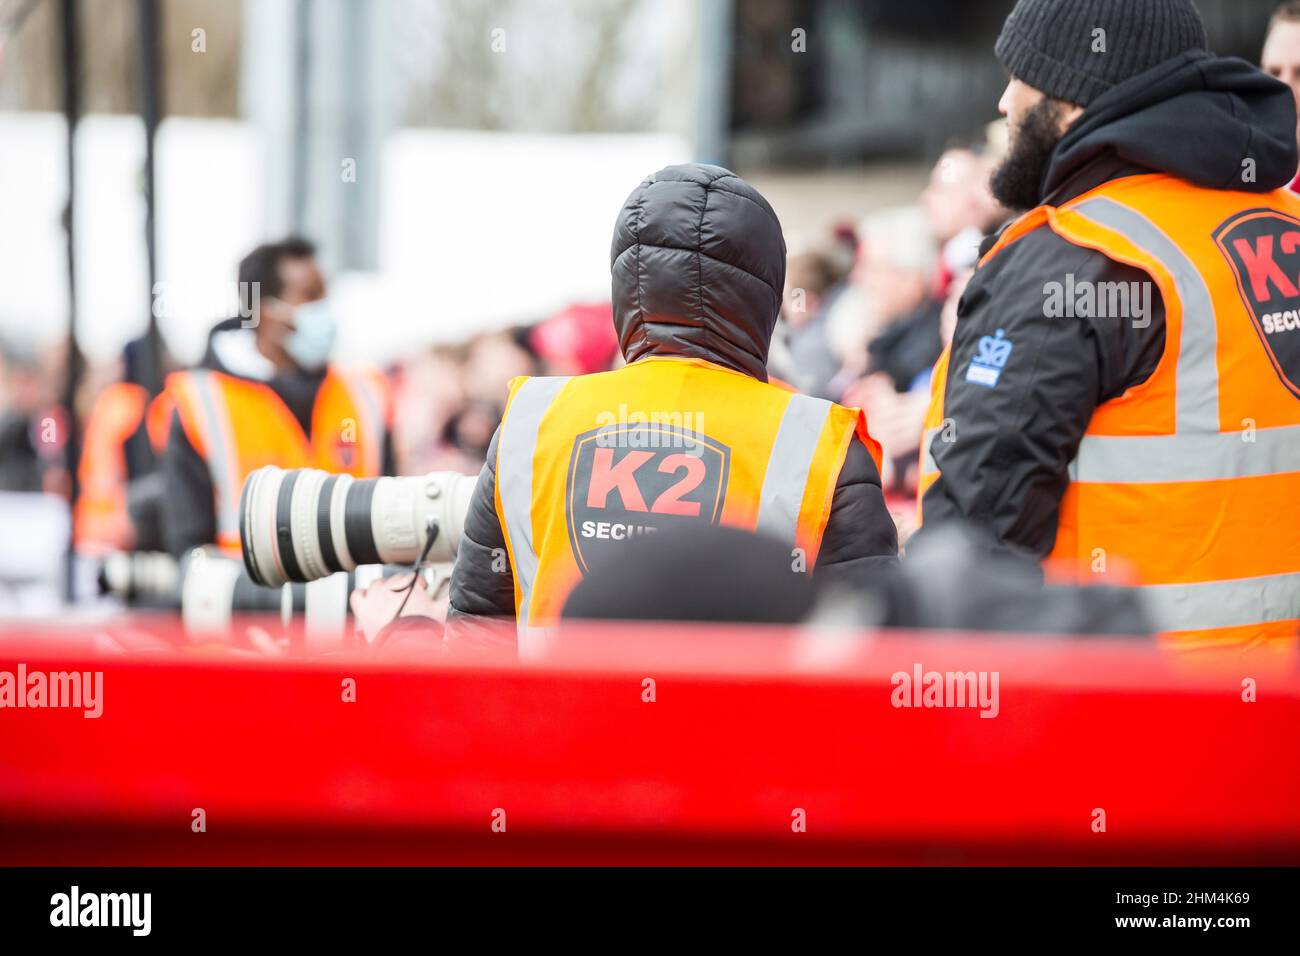 Sideline staff at UK football match: in-house security firm K2 and sports photographers using equipment with Canon prime lens. Stock Photo